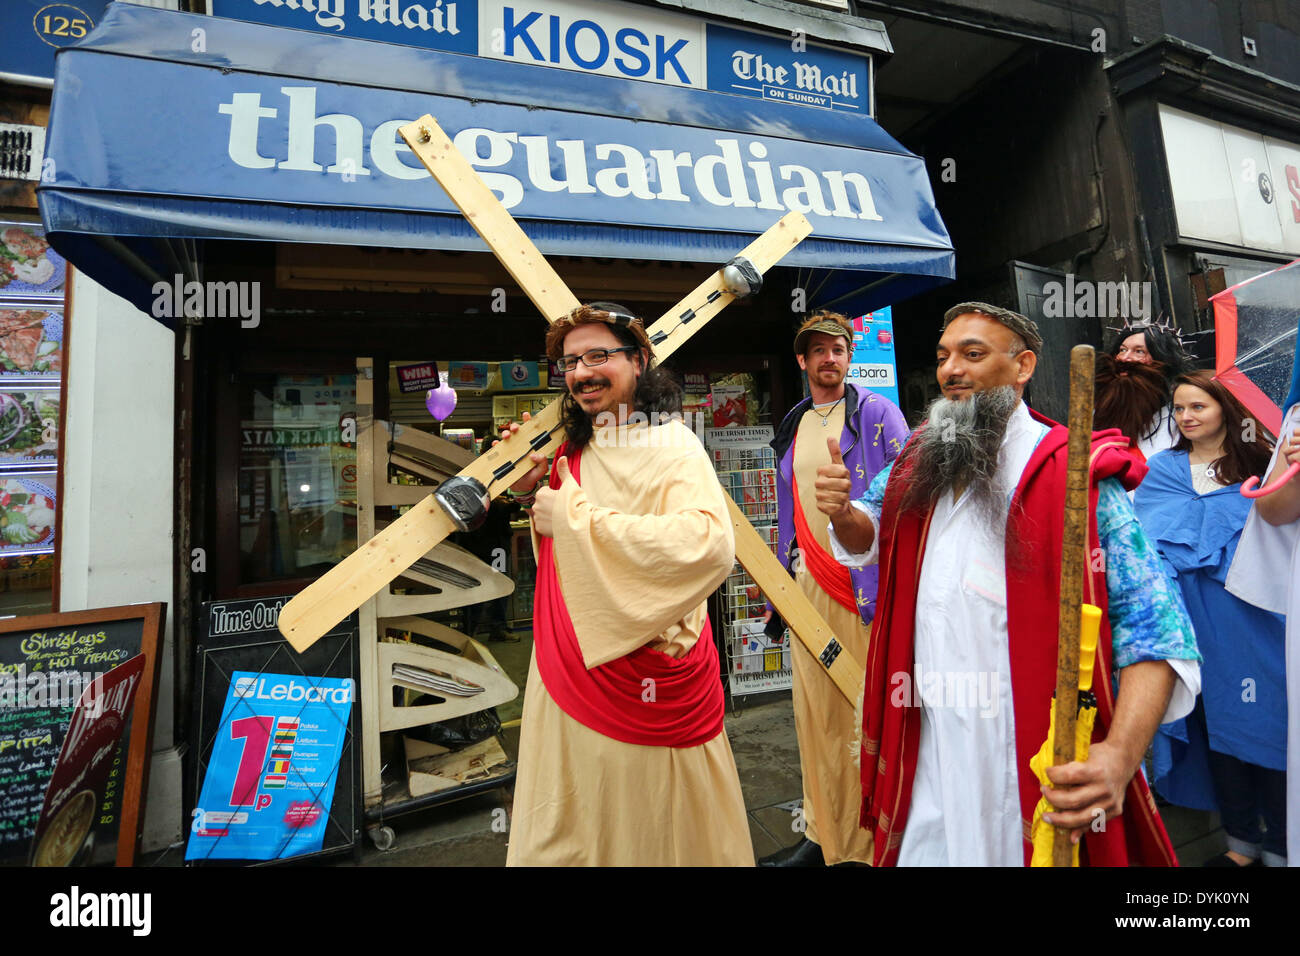 London, UK. 20th April 2014. Participants dressed as Jesus Christ in the annual Easter Sunday Christathon 2014 pub crawl, London, England. The pub crawl moves between London pubs with names associated with biblical themes or characters and started at the Trinity Pub near London Bridge, moving on to the St Christopher Inn before heading into Central London. Credit:  Paul Brown/Alamy Live News Stock Photo